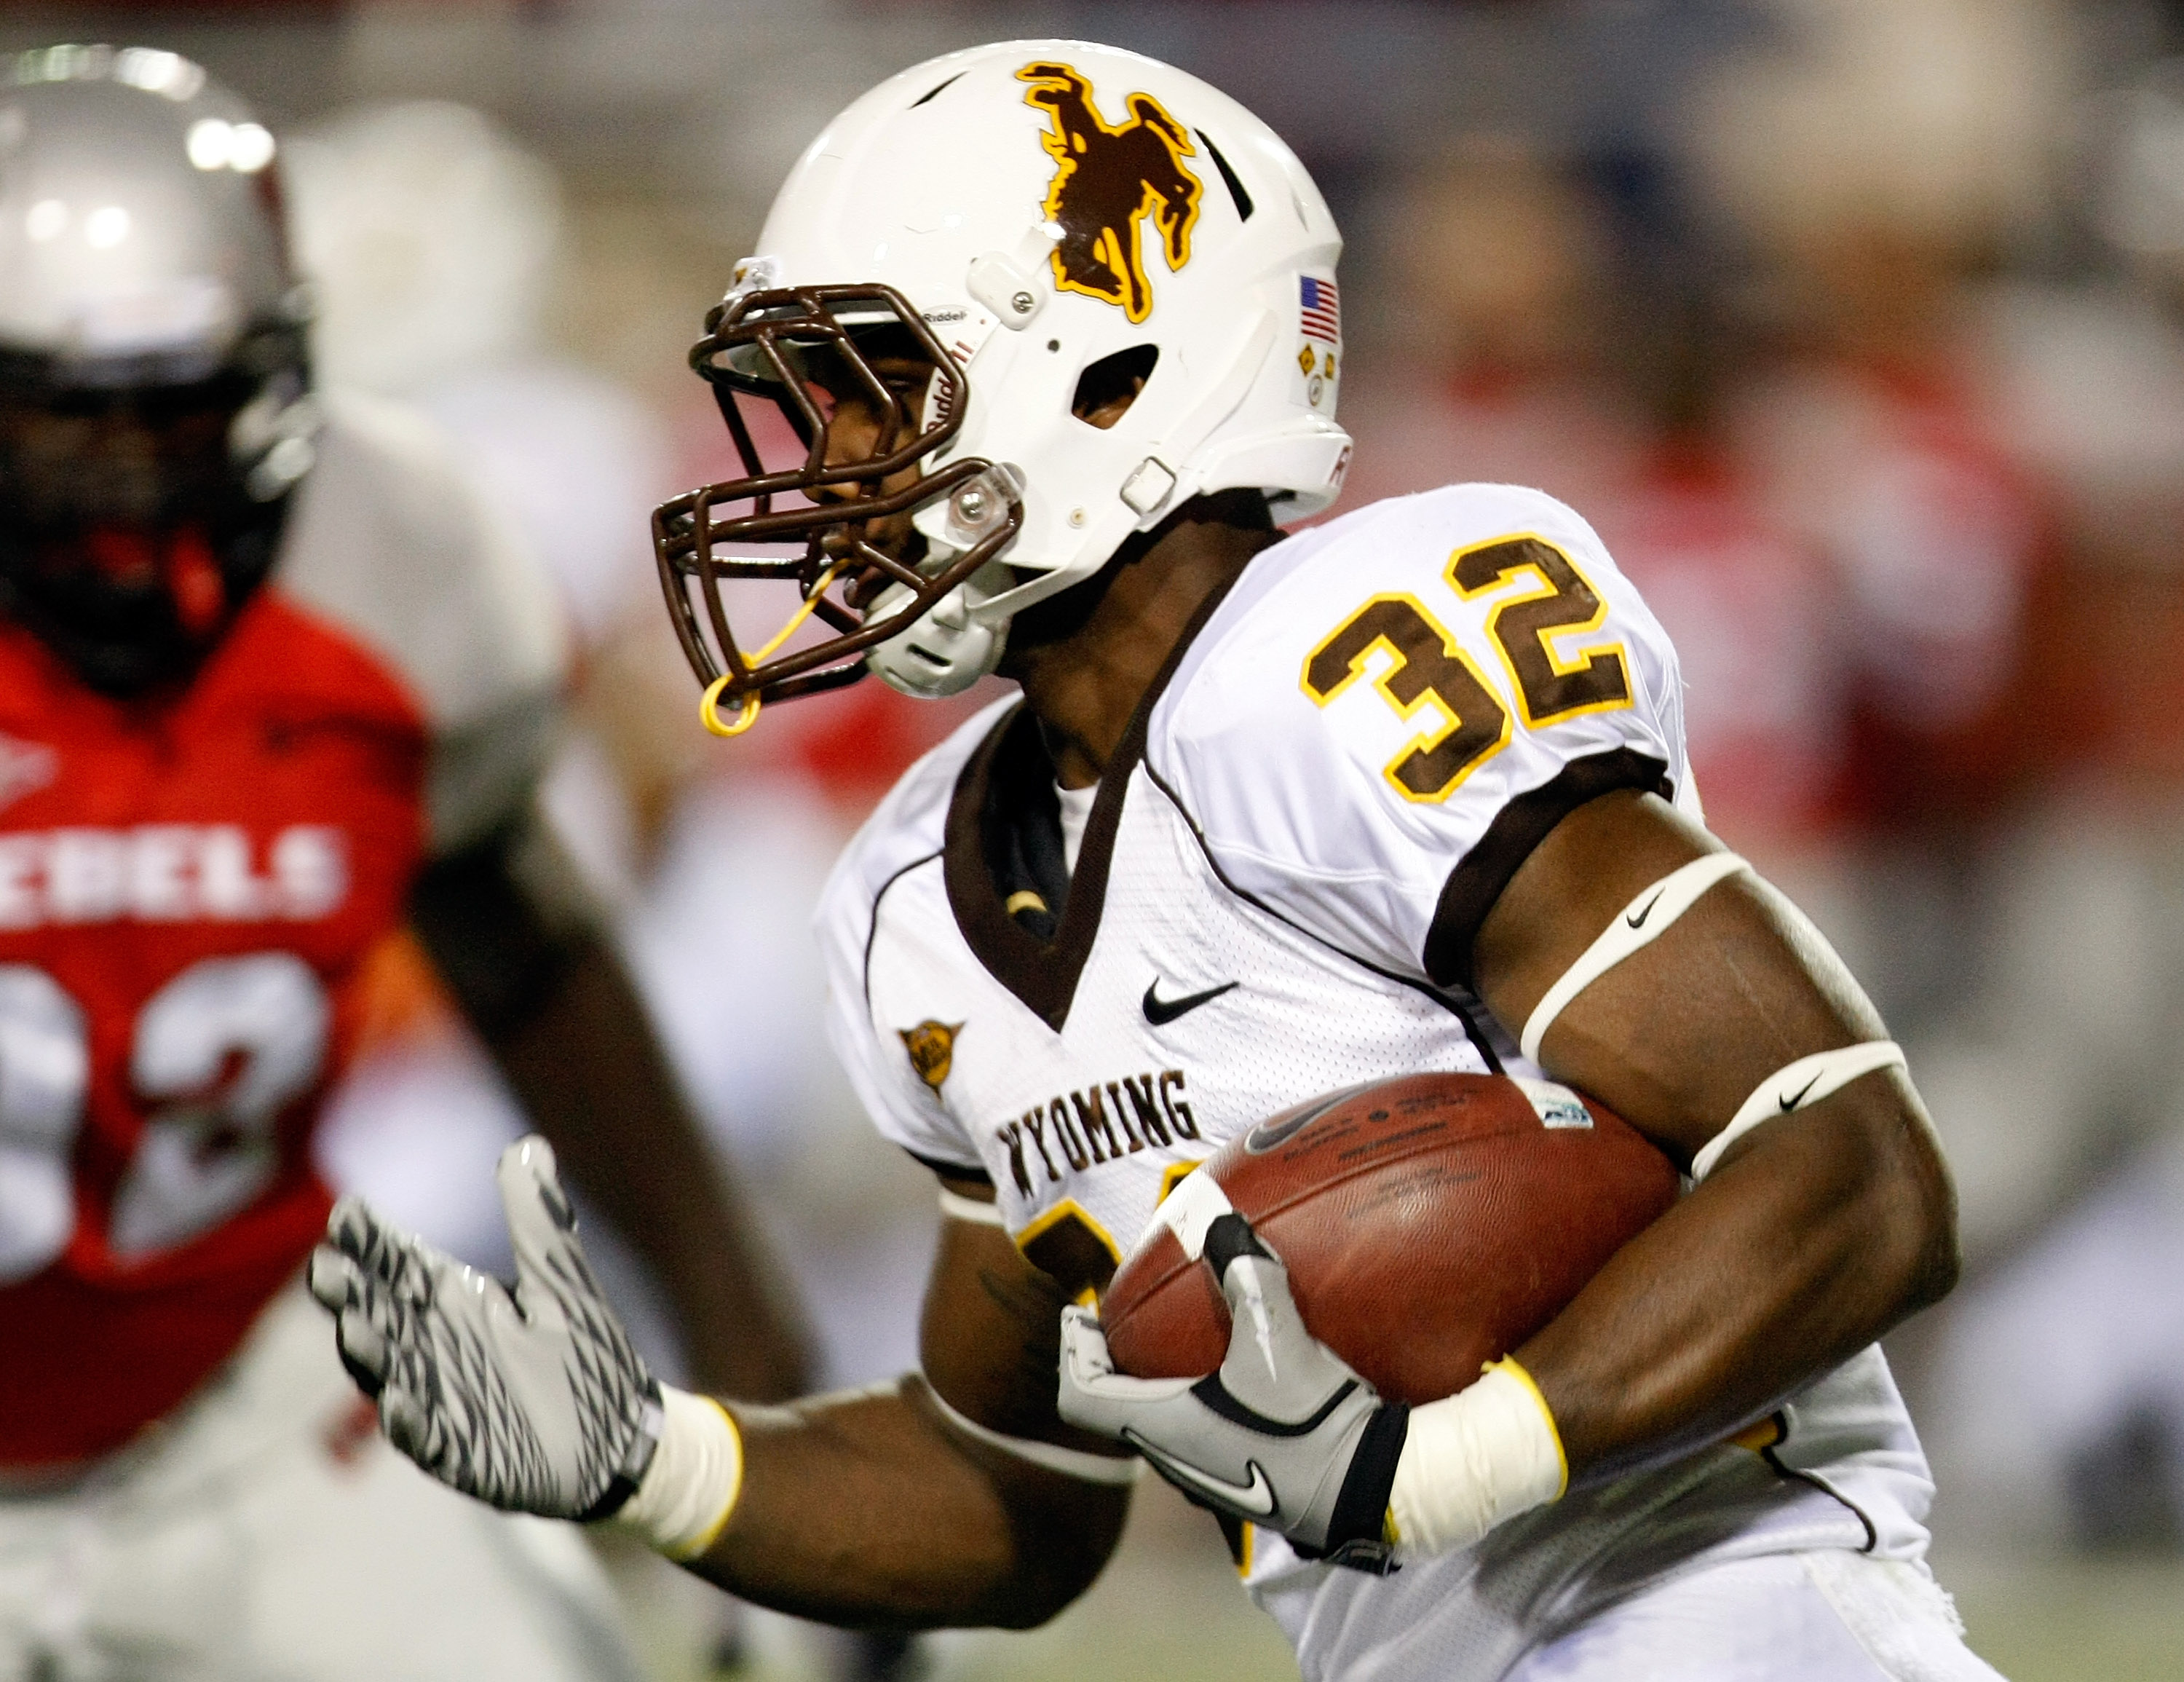 LAS VEGAS - NOVEMBER 13:  Alvester Alexander #32 of the Wyoming Cowboys runs for a 72-yard touchdown against the UNLV Rebels during their game at Sam Boyd Stadium November 13, 2010 in Las Vegas, Nevada.  (Photo by Ethan Miller/Getty Images)